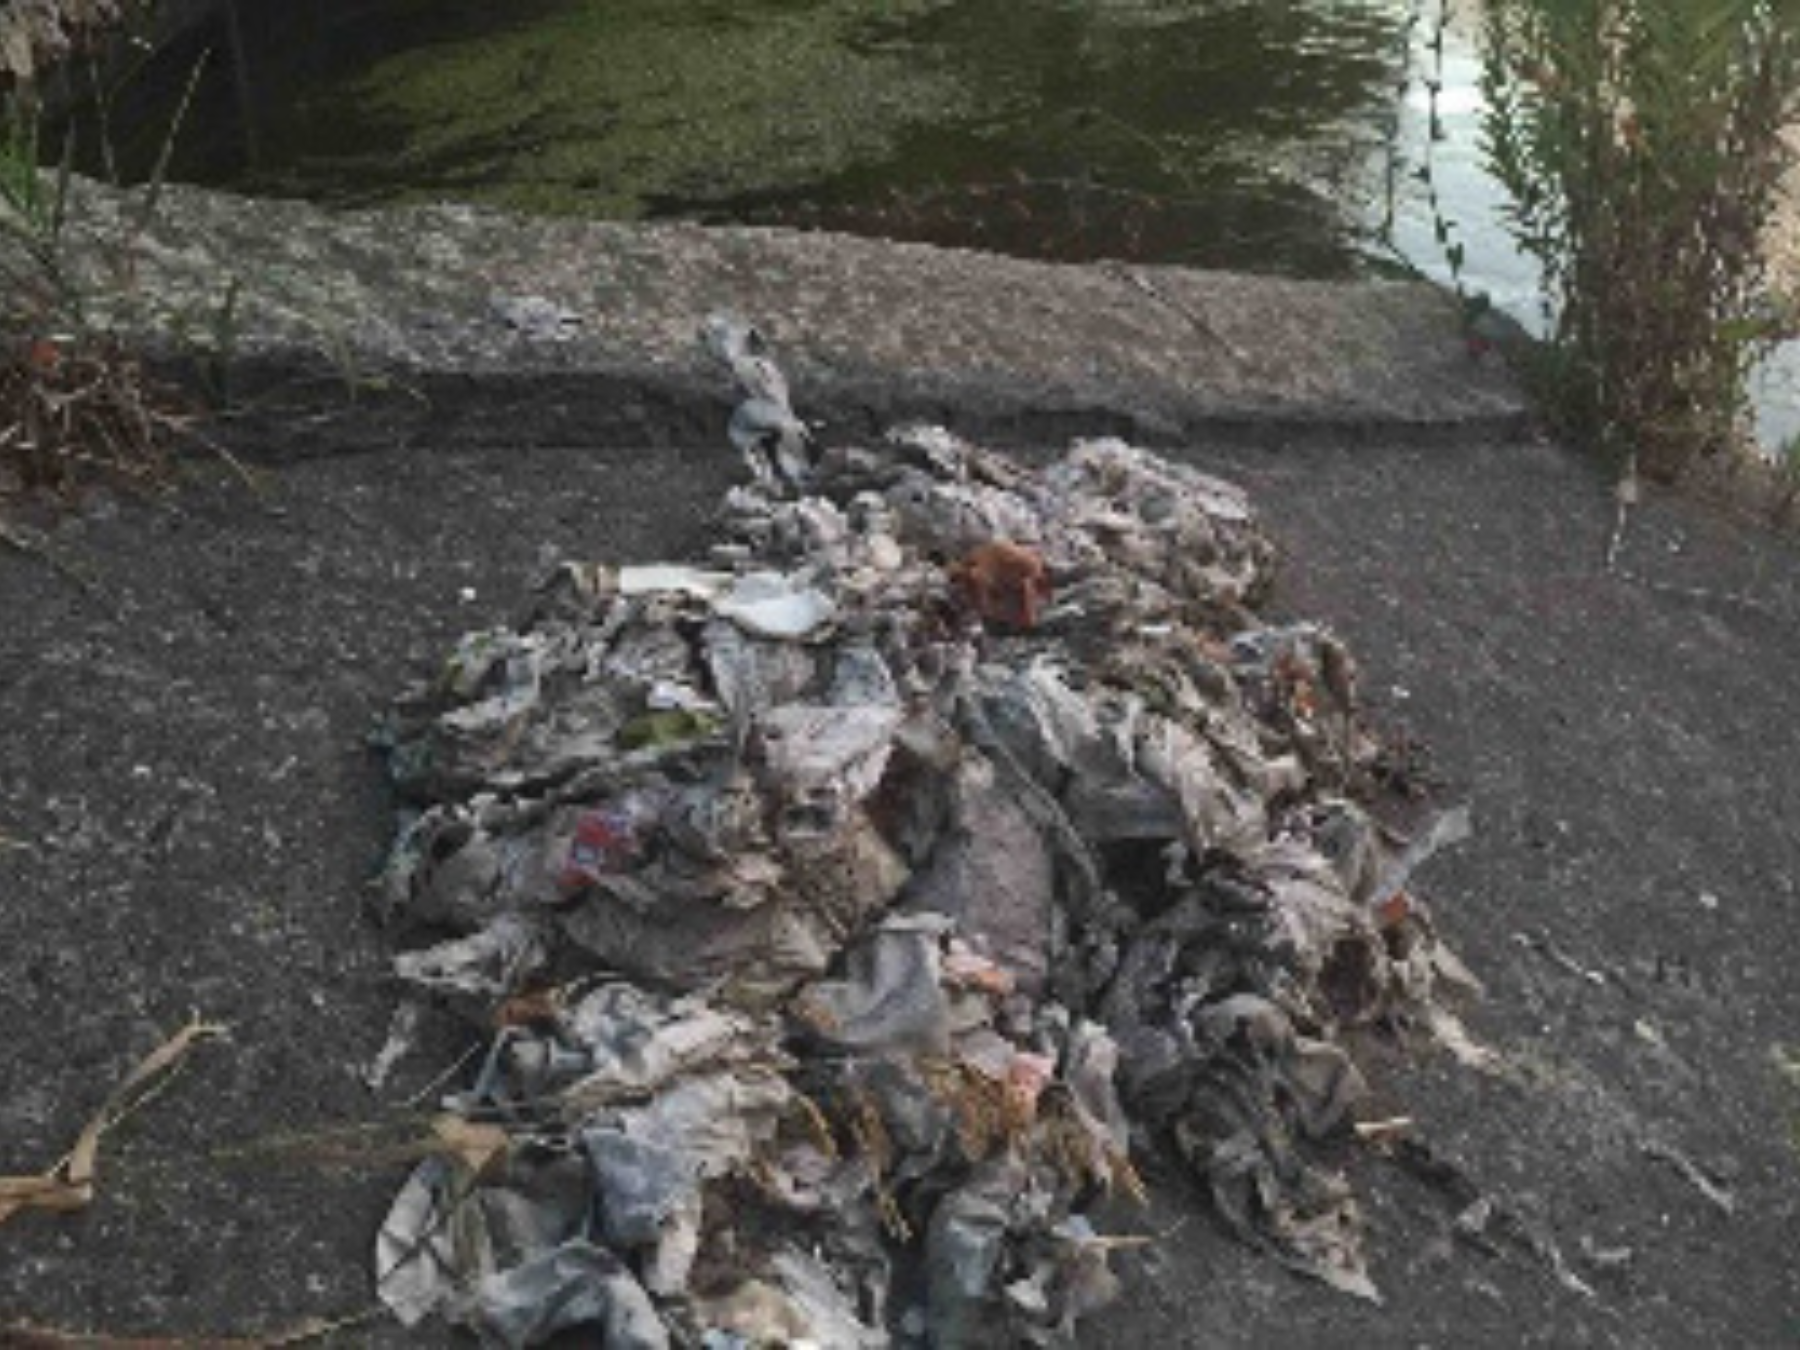 A picture of baby wipes claimed to be flushable that ended up in a body of water.